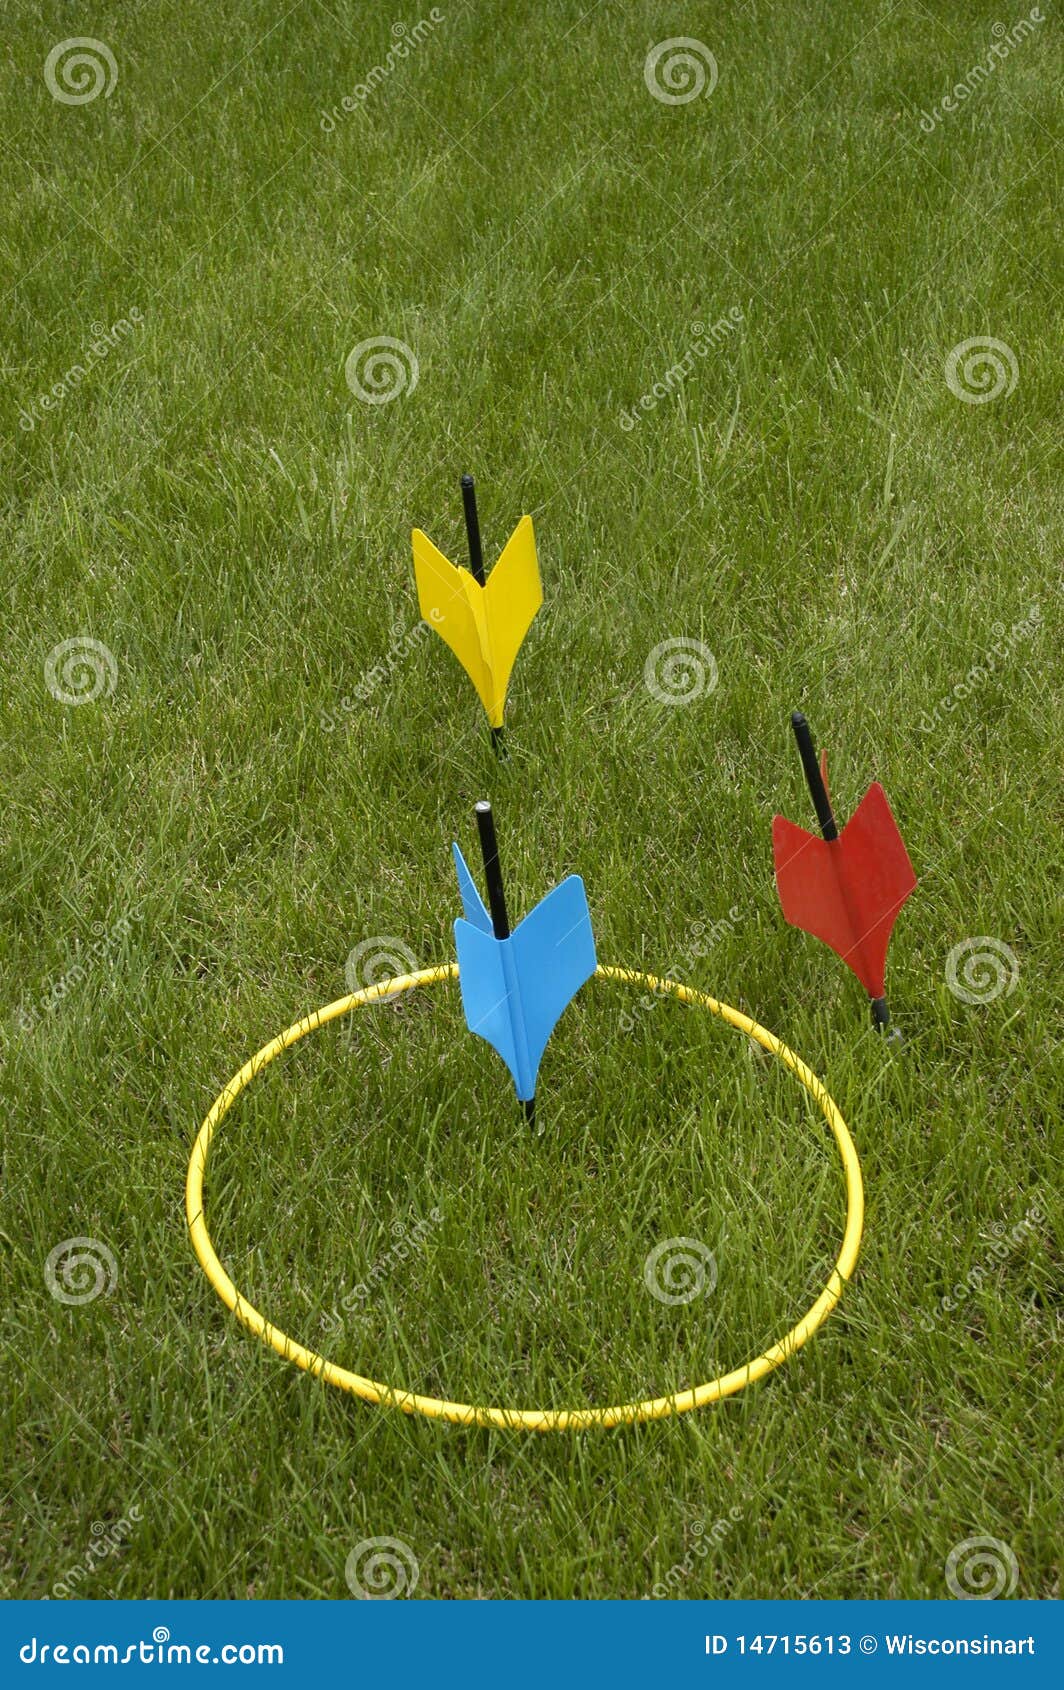 lawn darts, popular family and party jarts game